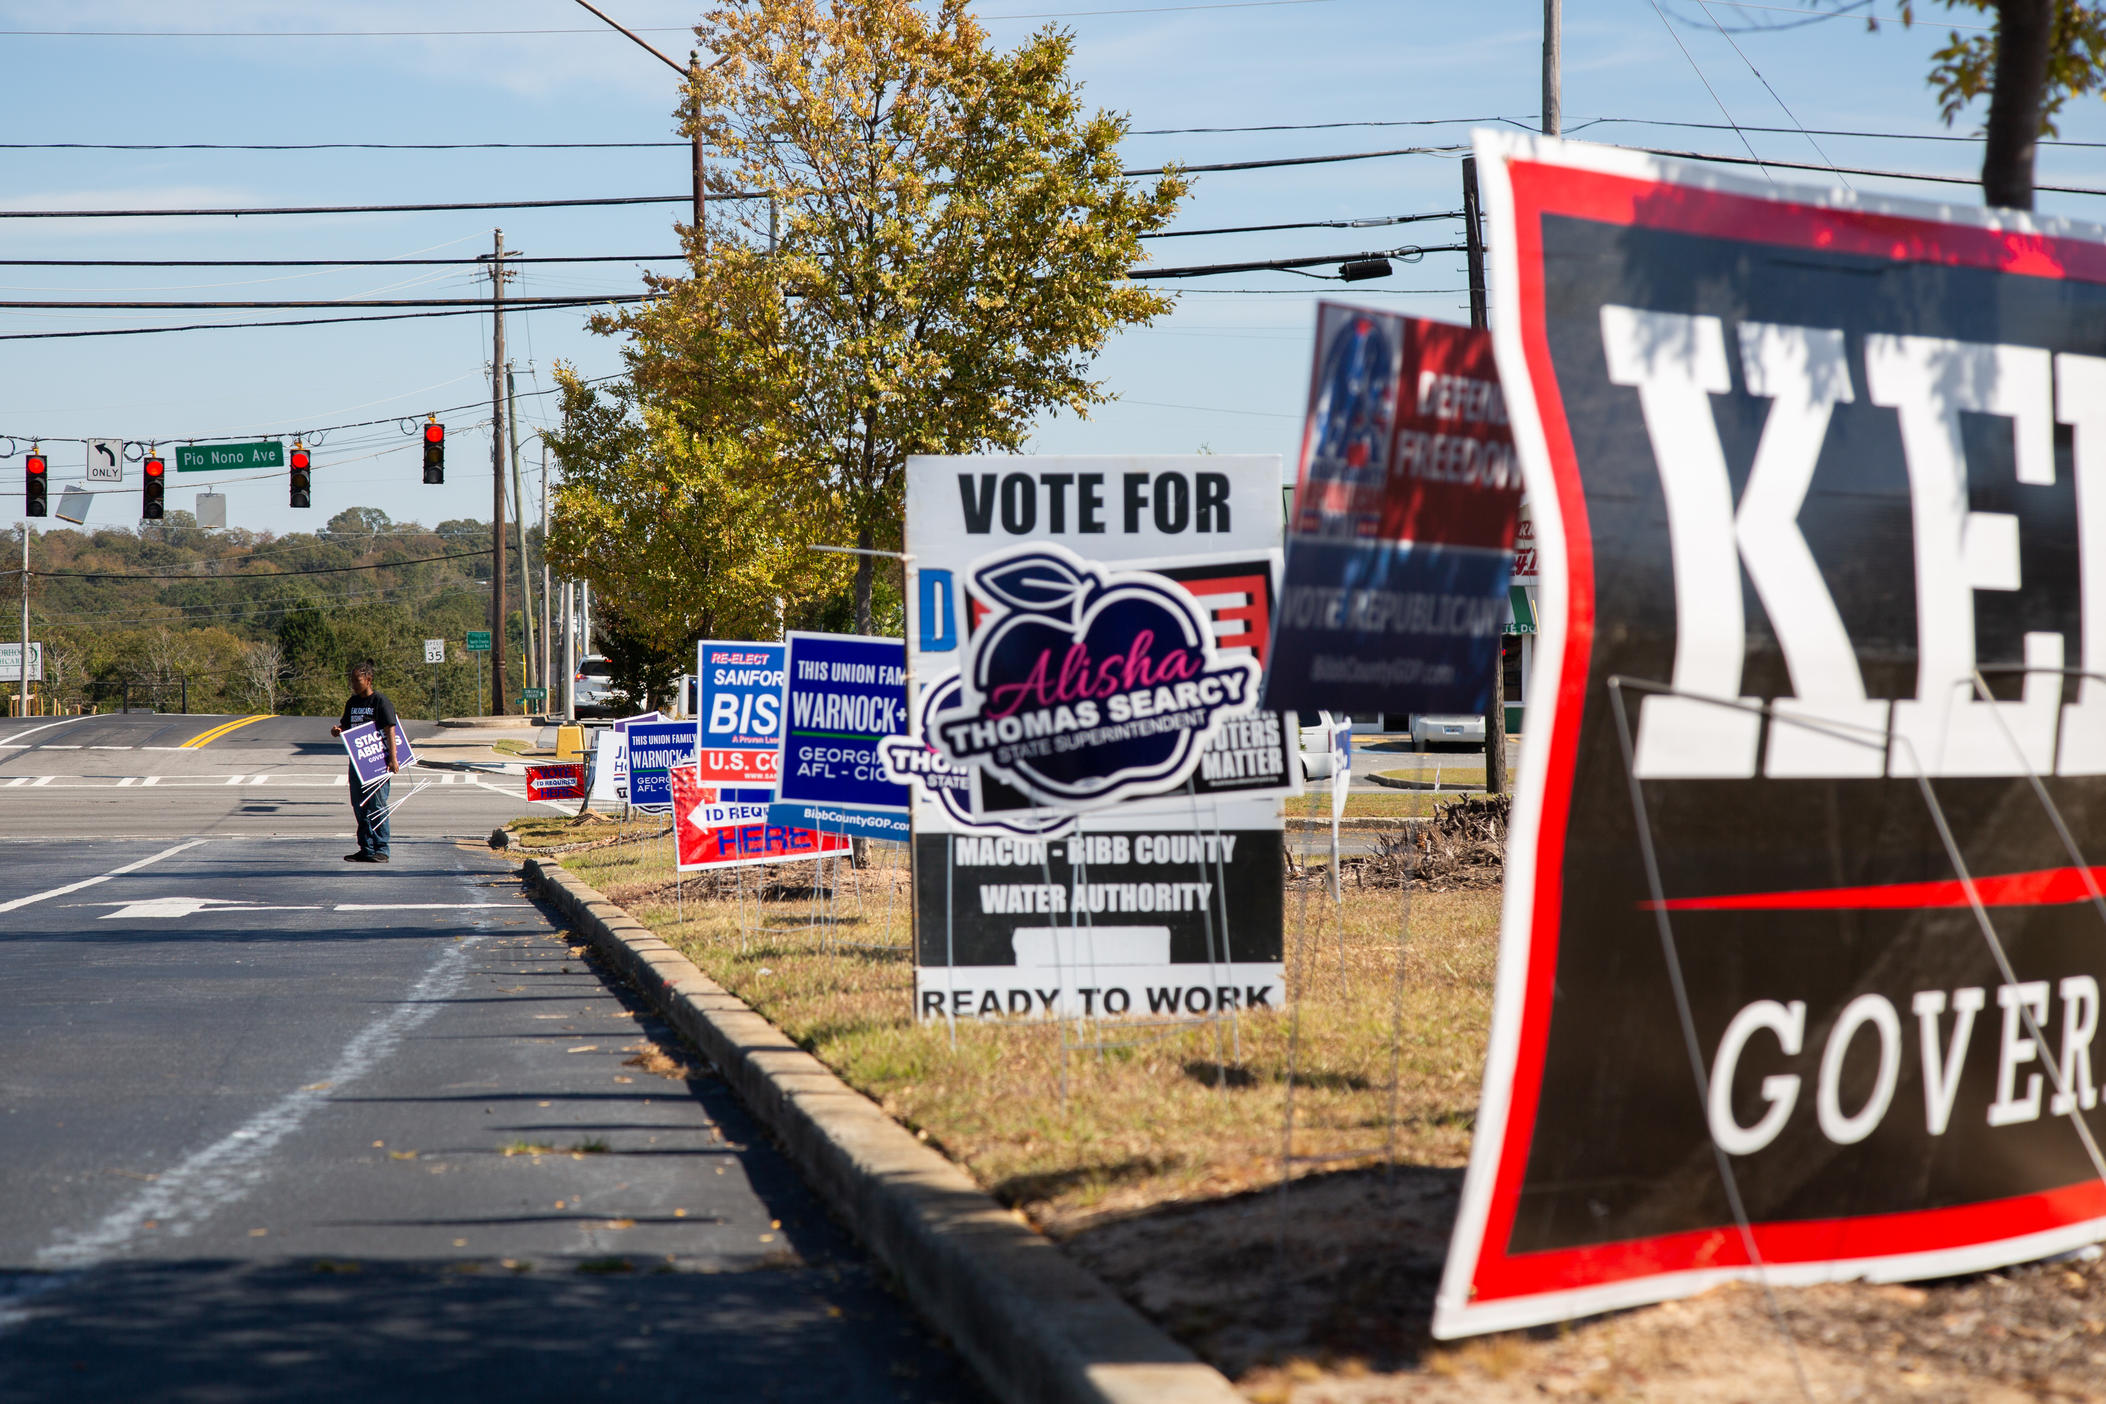 Voters in Bibb County take advantage of Sunday voting on Oct. 23, 2022, in Macon, Ga., ahead of the November midterm election.